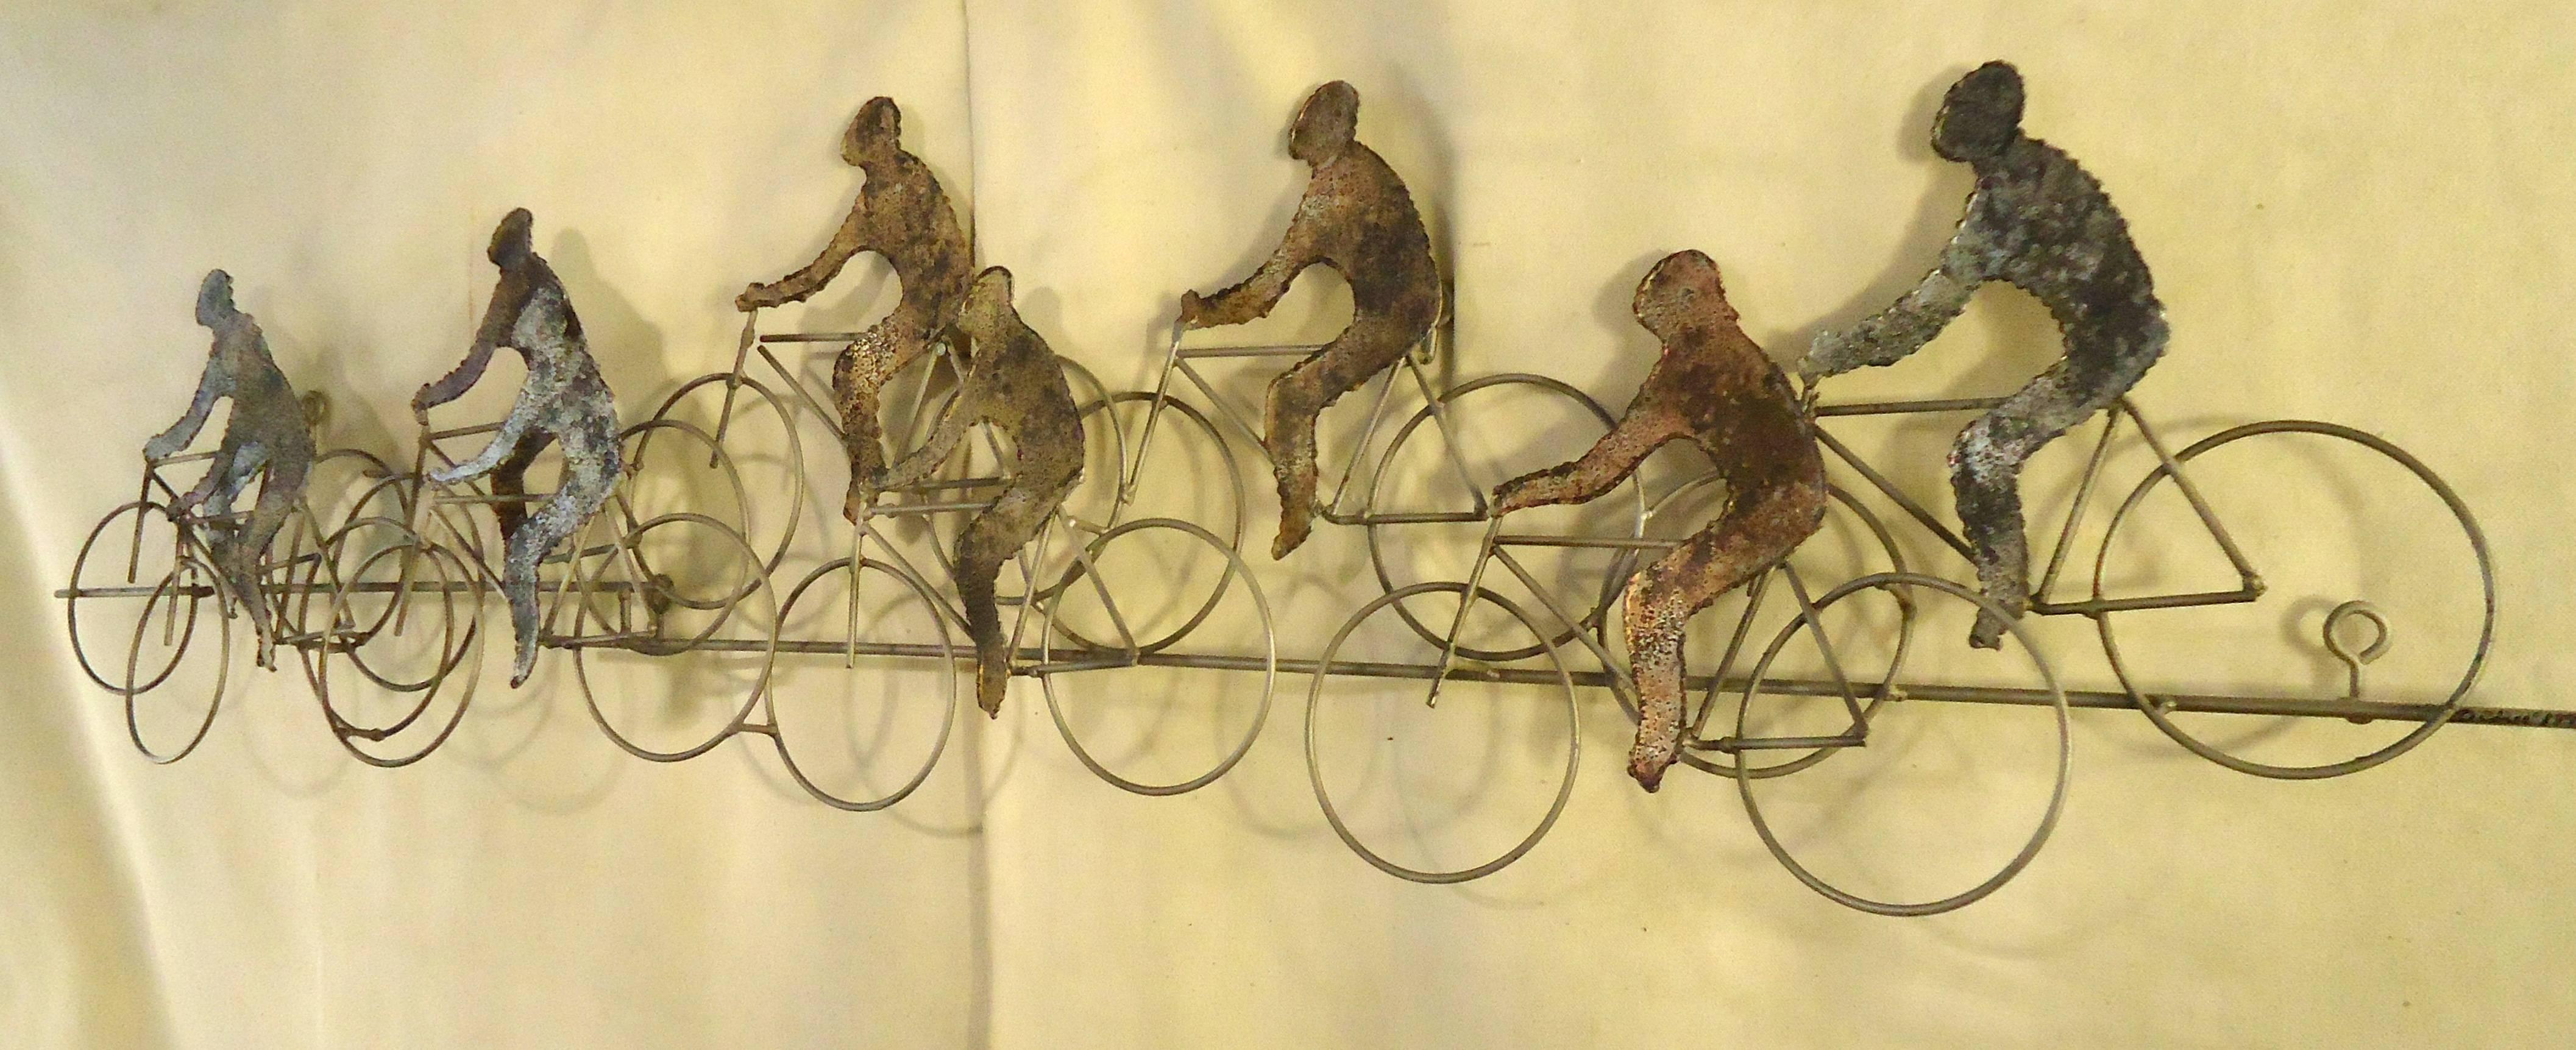 Beautiful abstract wall hanging by Curtis Jere, depicting a bicycle race. Made from torch cut metal, assembled in a three dimensional pattern.

(Please confirm item location - NY or NJ - with dealer).
 